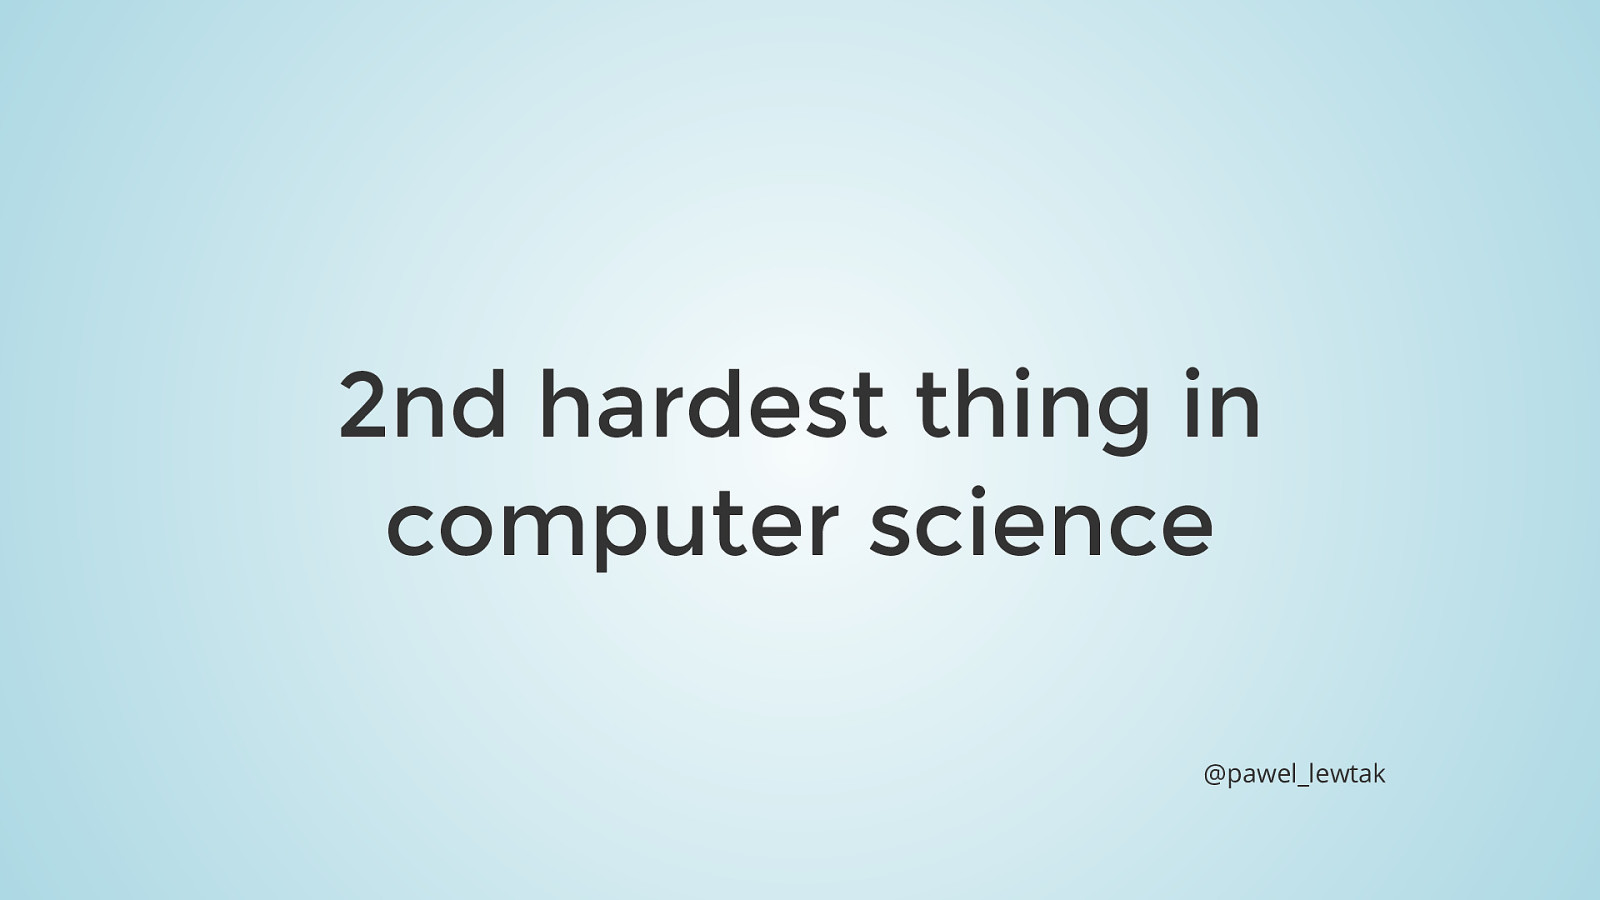 2nd hardest thing in computer science